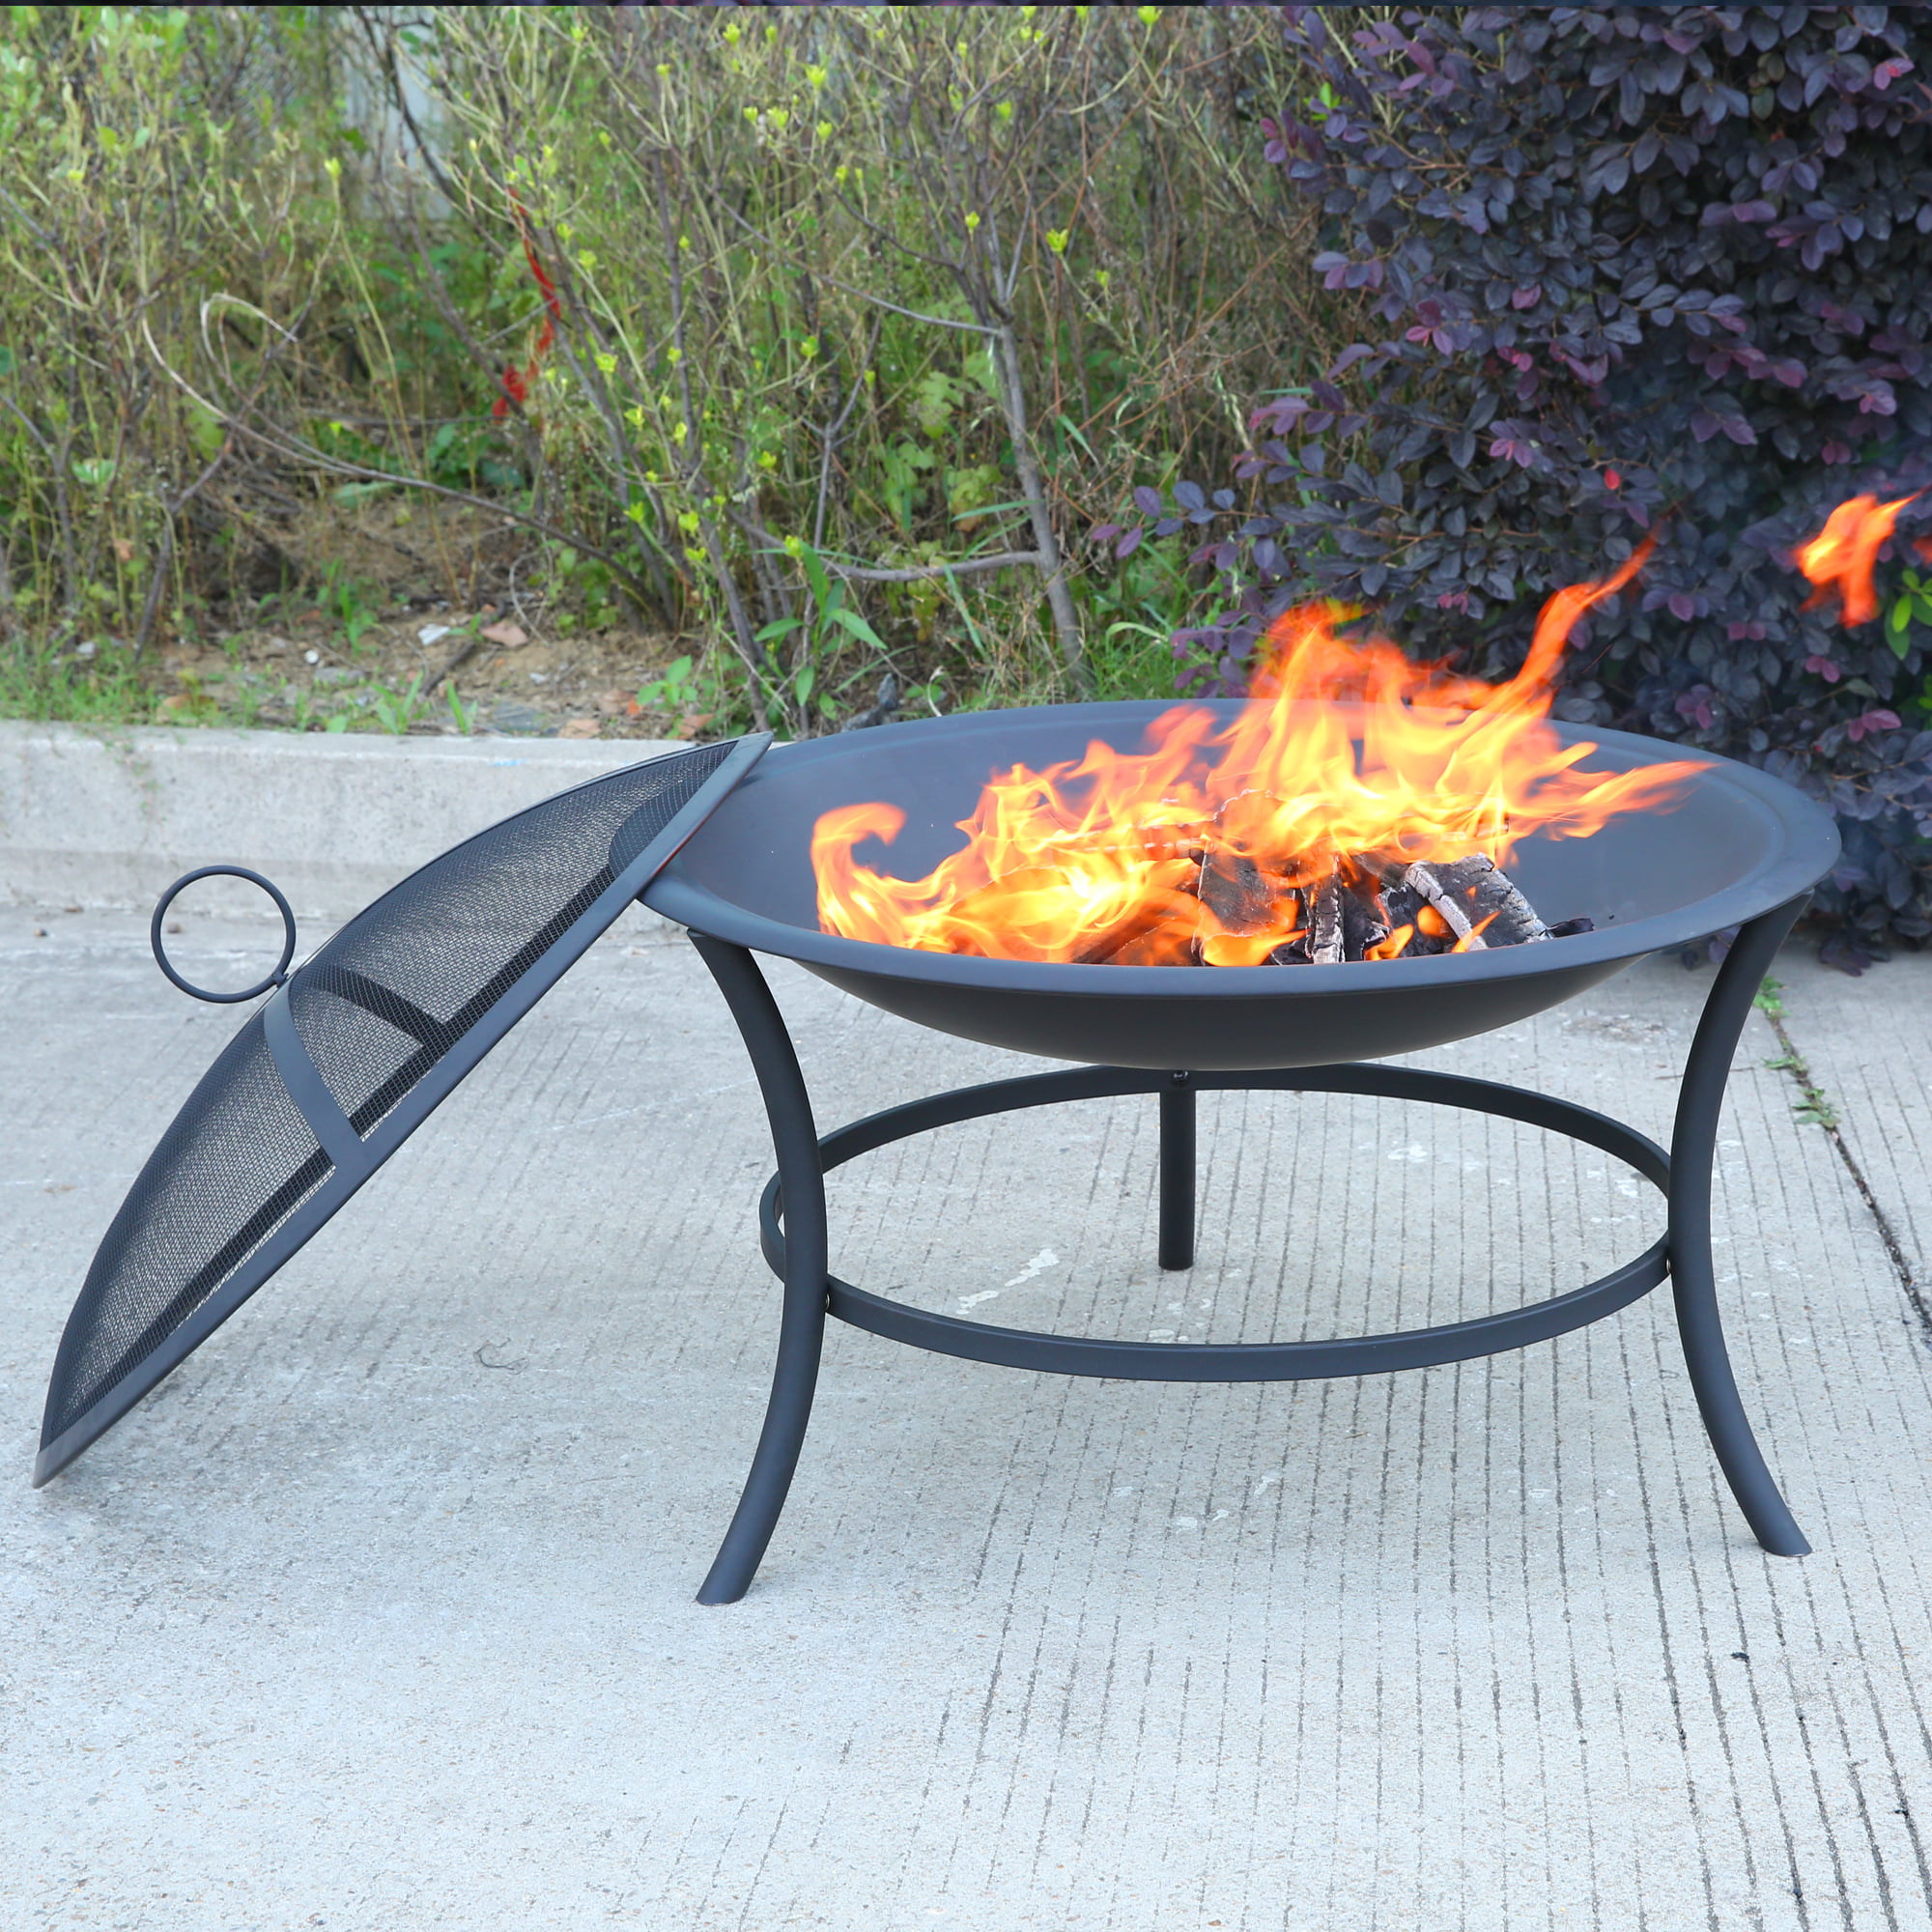 Micasa 29 Inch Fire Pit With Spark, Charcoal In A Fire Pit